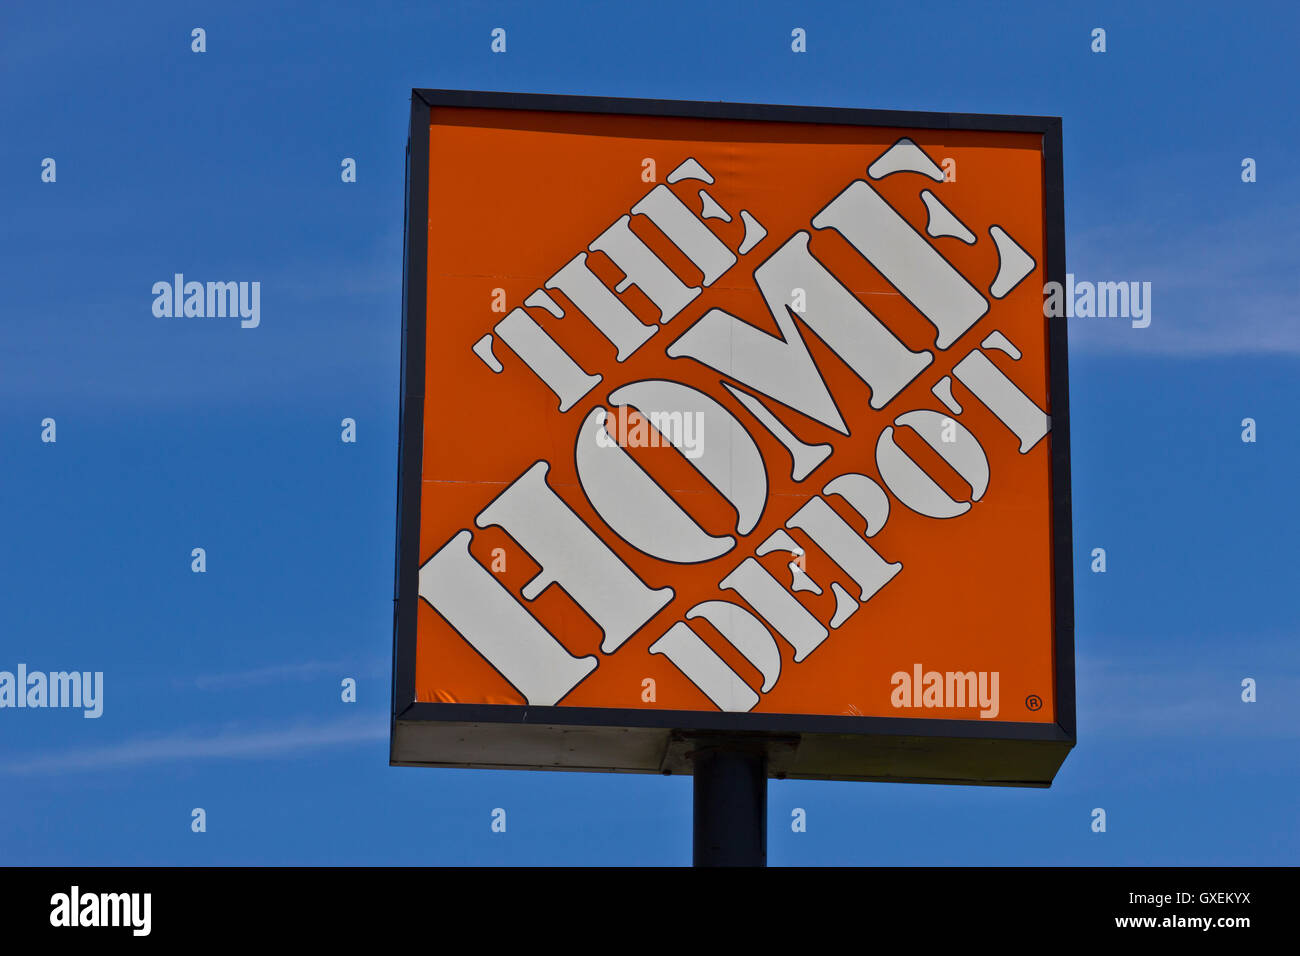 Indianapolis - Circa June 2016: The Home Depot Sign. Home Depot is the Largest Home Improvement Retailer in the US I Stock Photo